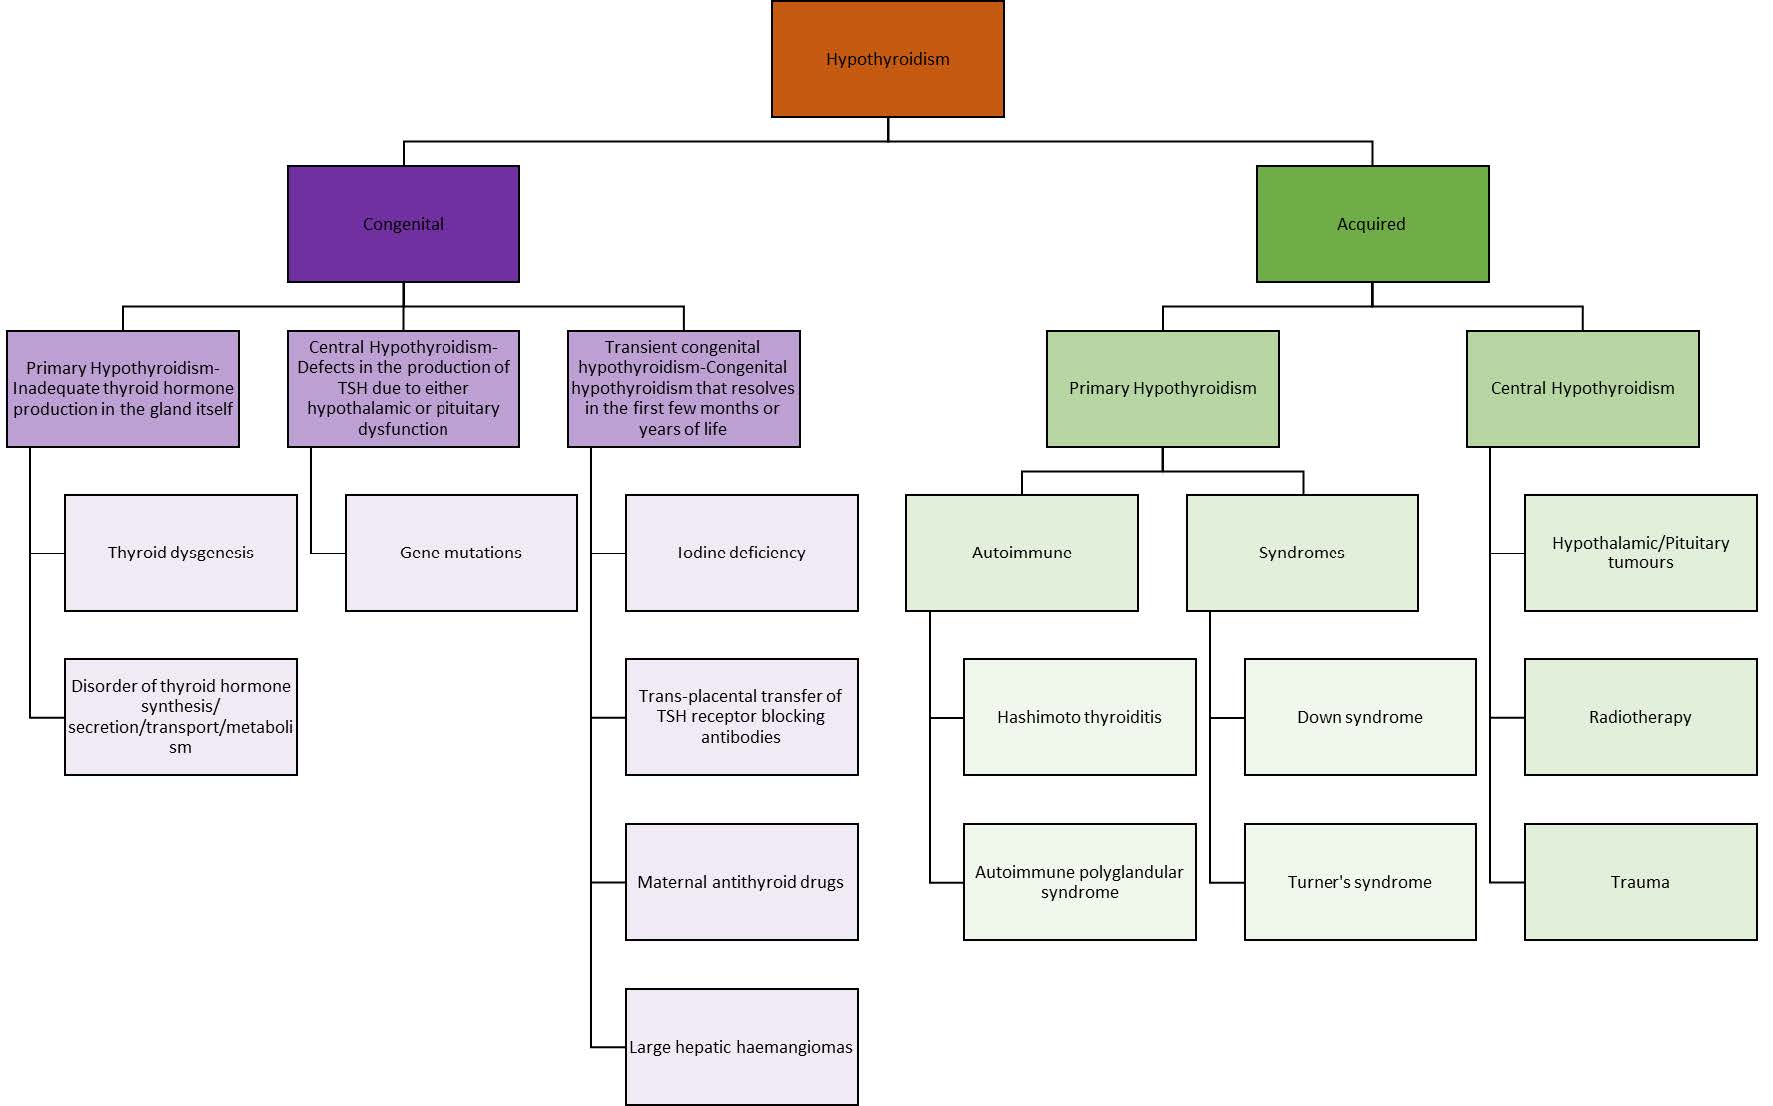 Figure 3.3: Classification of Causes of Hypothyroidism